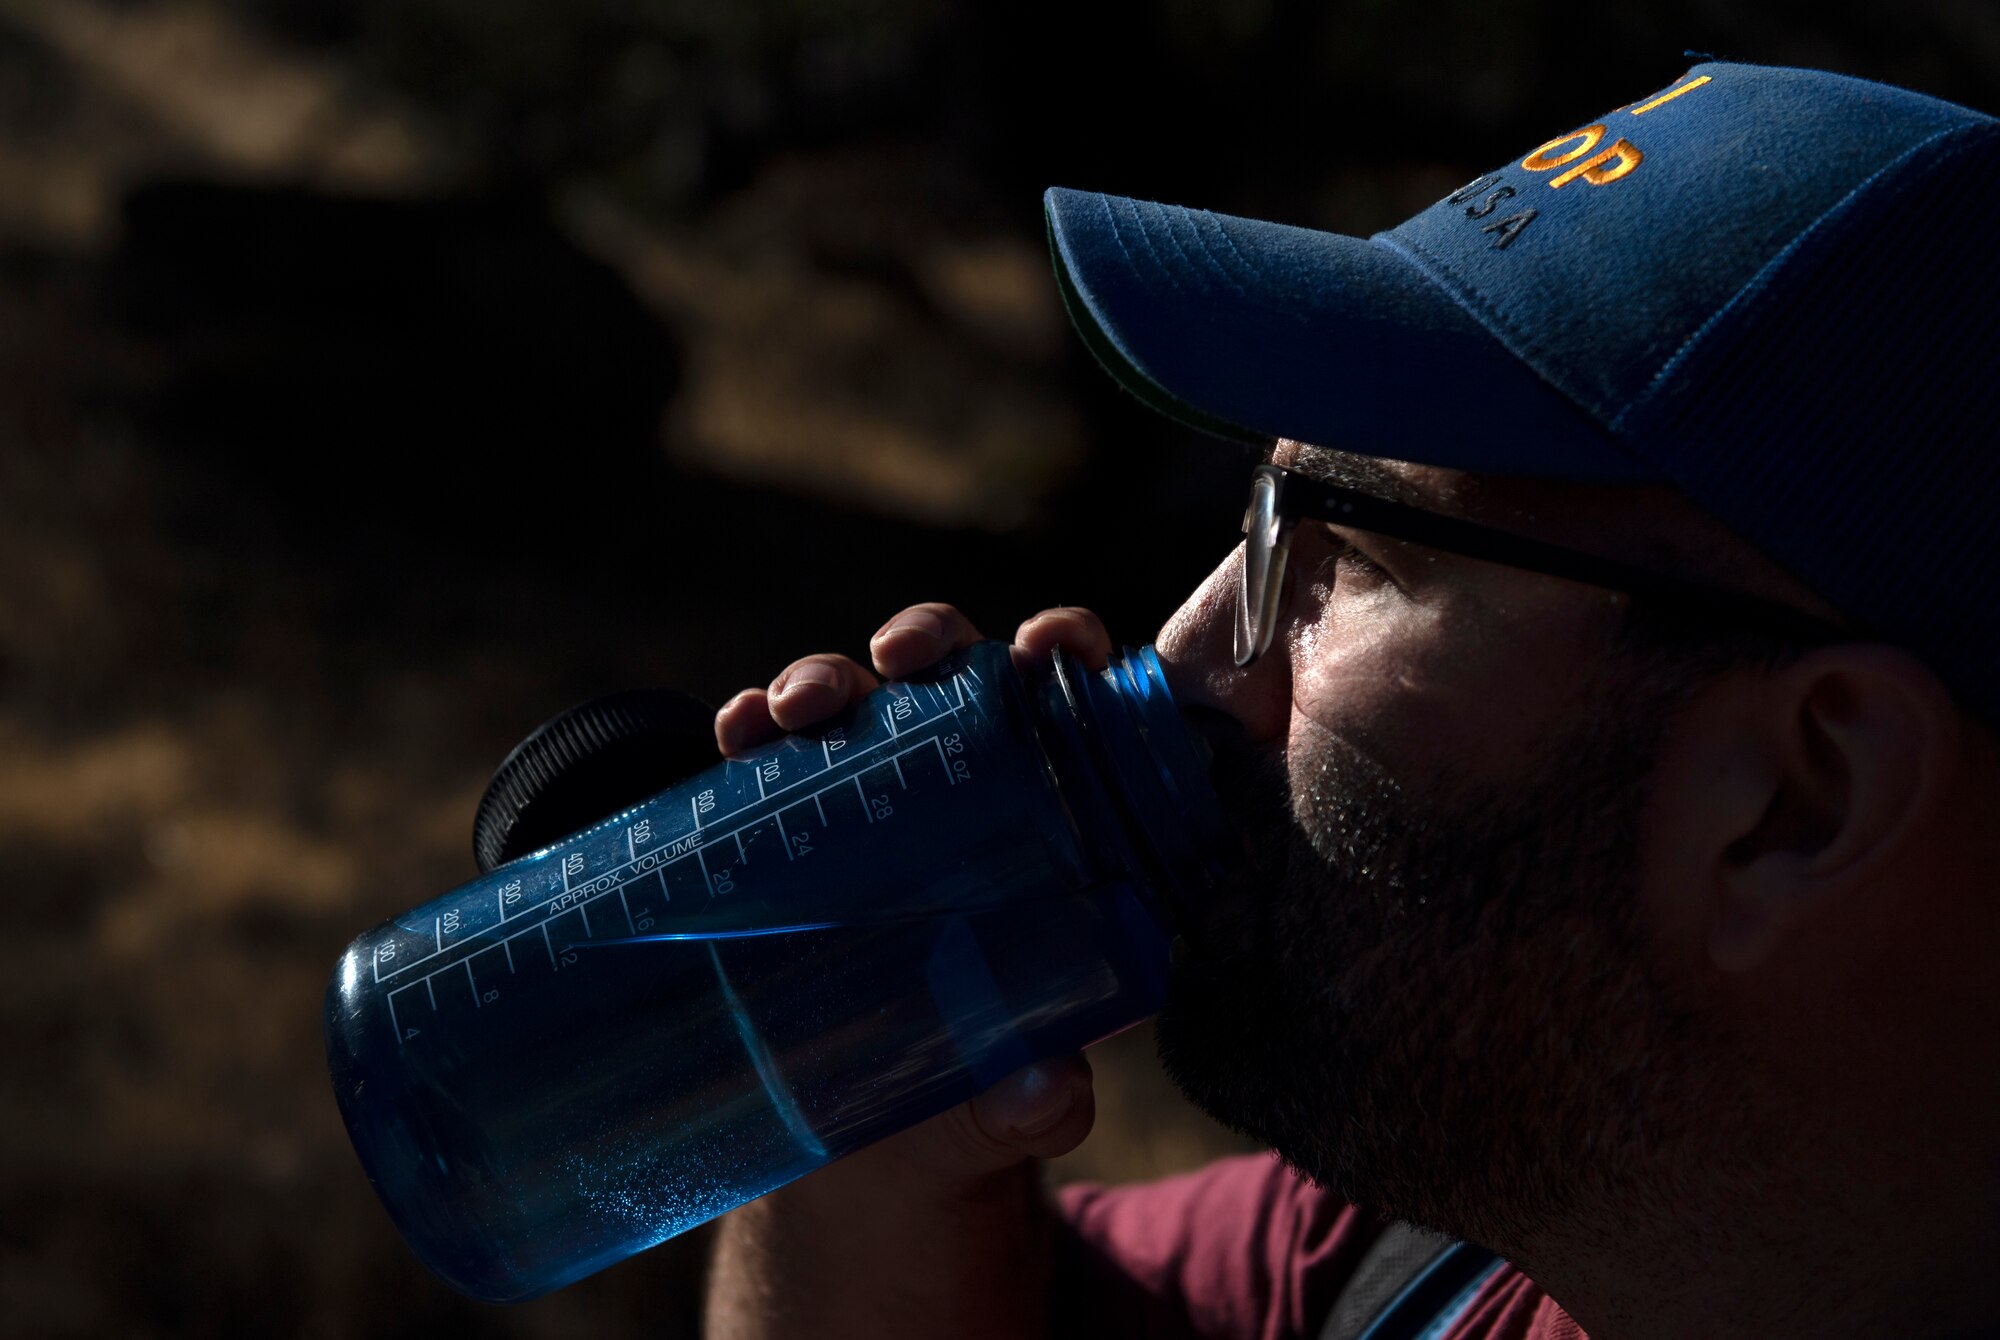 A man takes a drink of water during a hike.